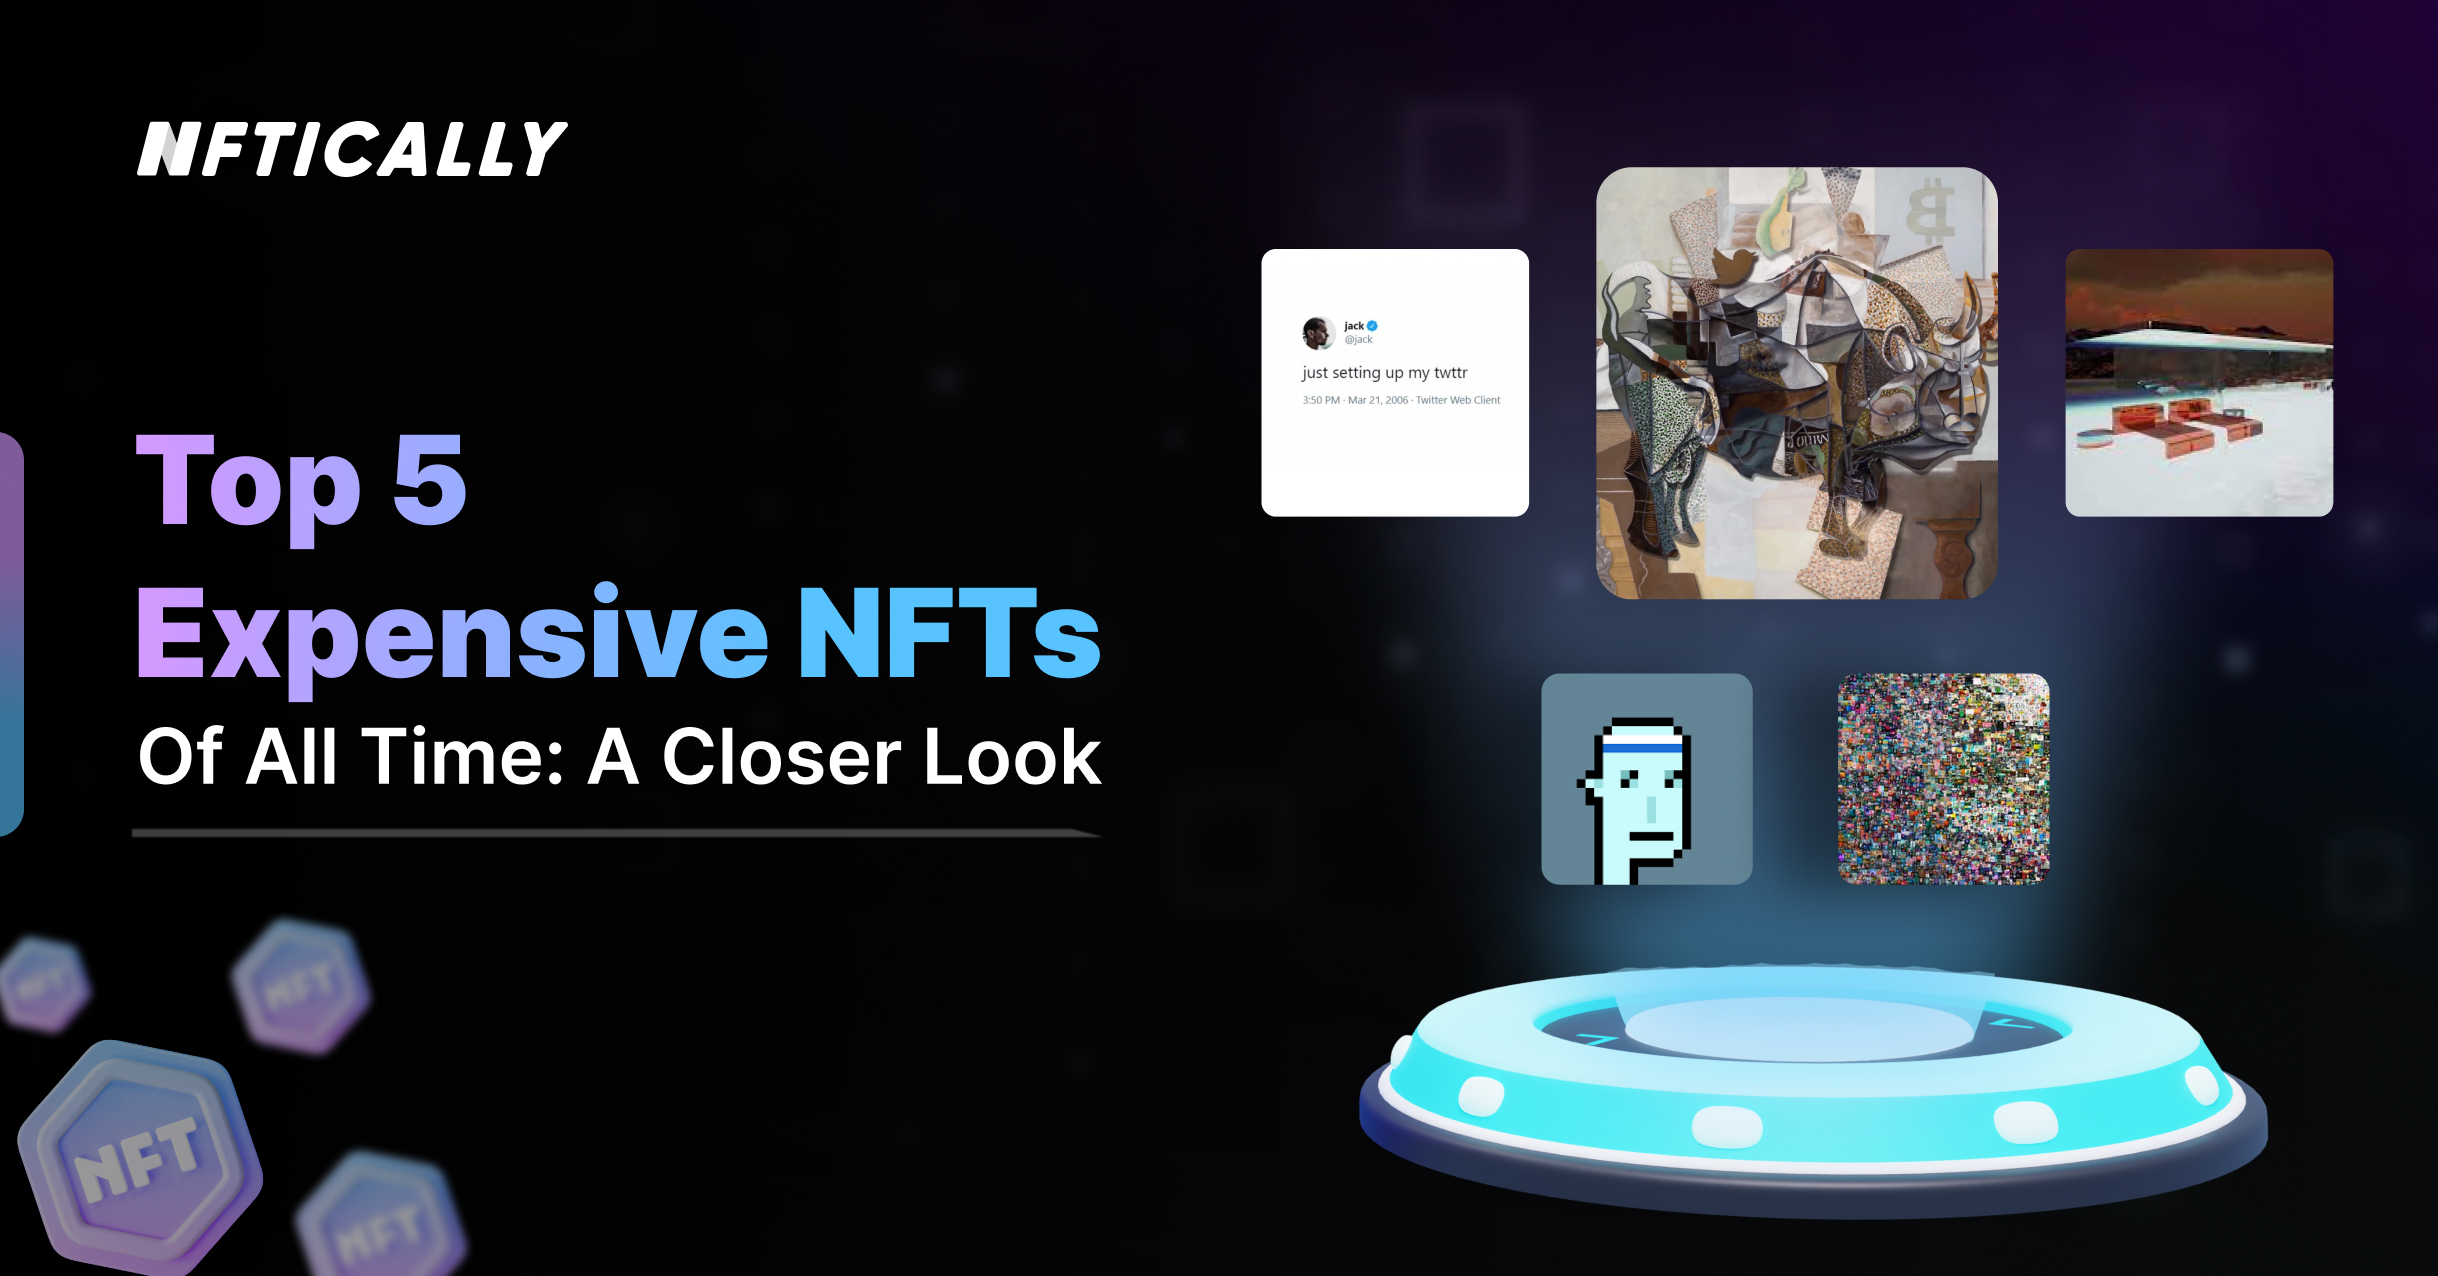 Top 5 Expensive NFTs of All Time: A Closer Look